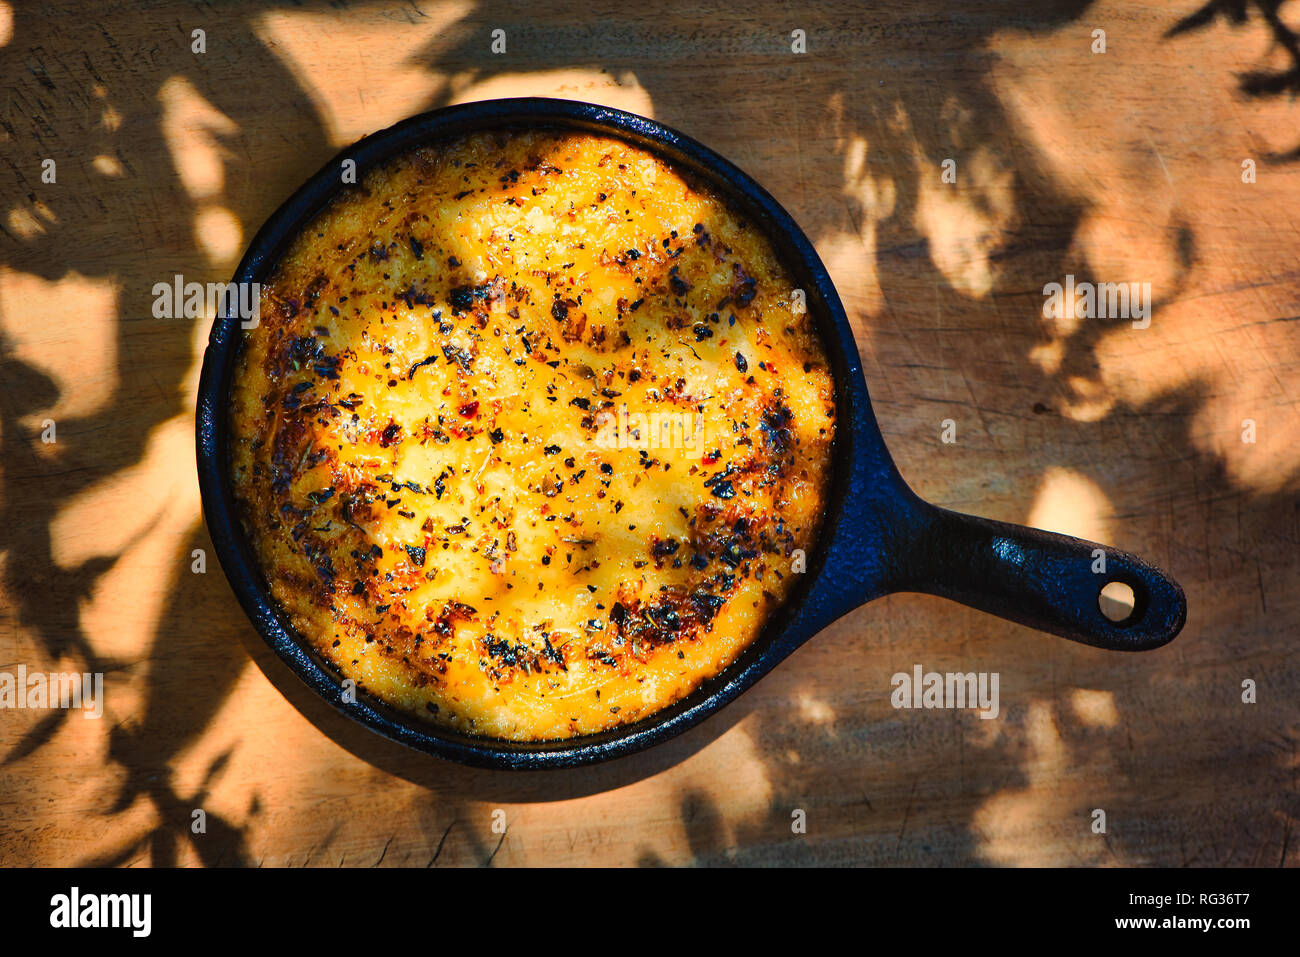 Delicious Argentinian Provolone Yarn Cheese (Provoleta) that was cooked in a cast iron skillet over the embers presented on an old wooden board. Stock Photo